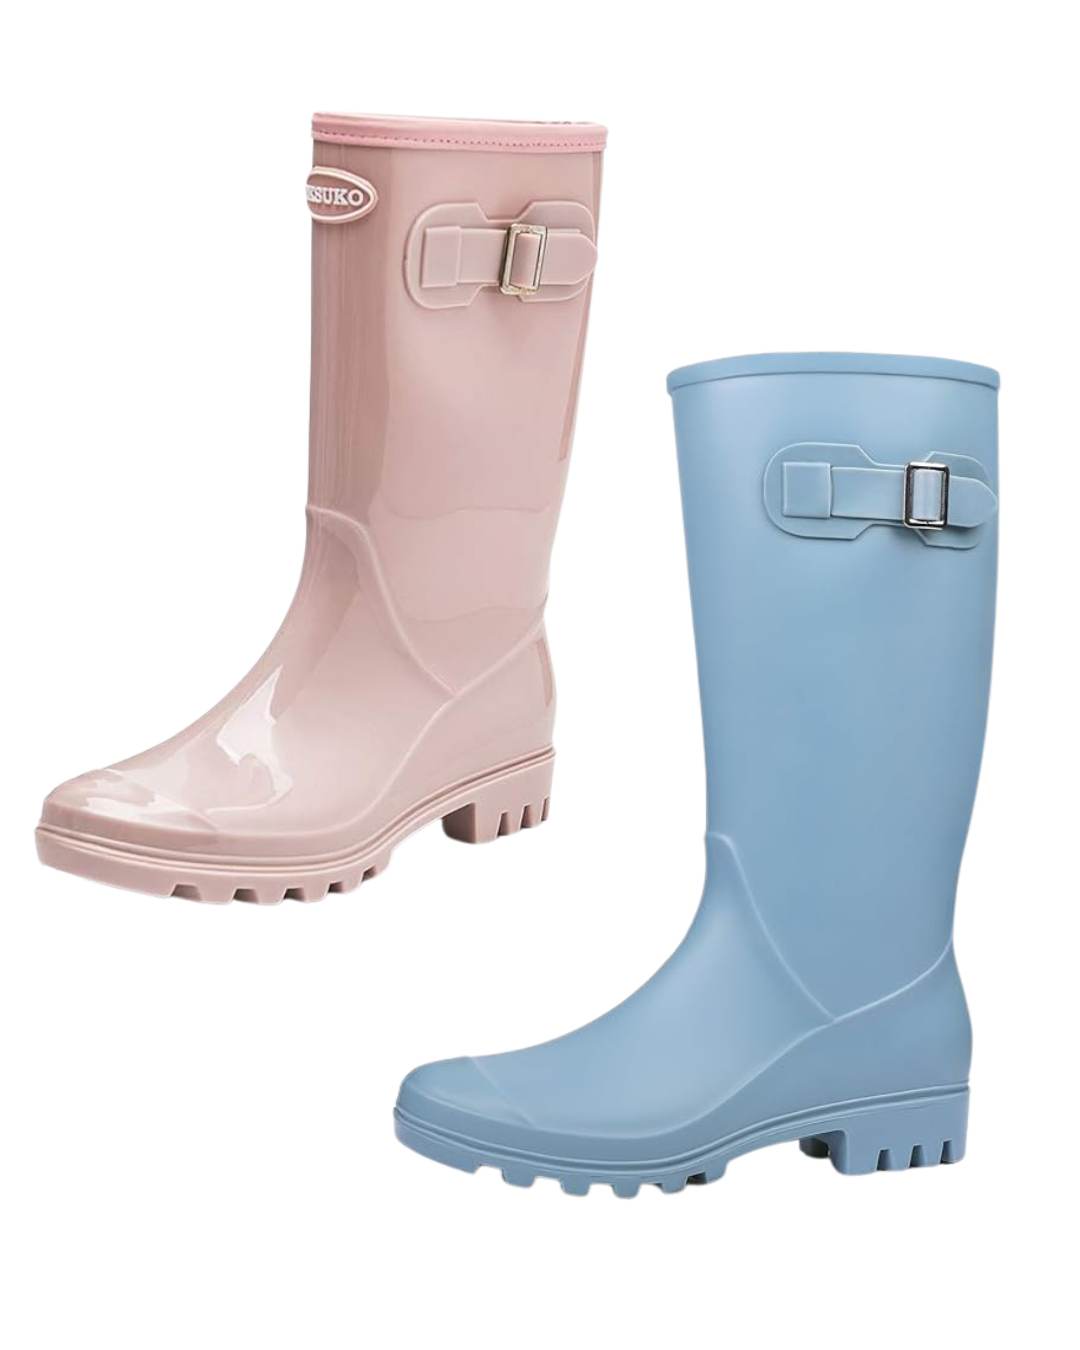 one pink and one blue tall rain boots